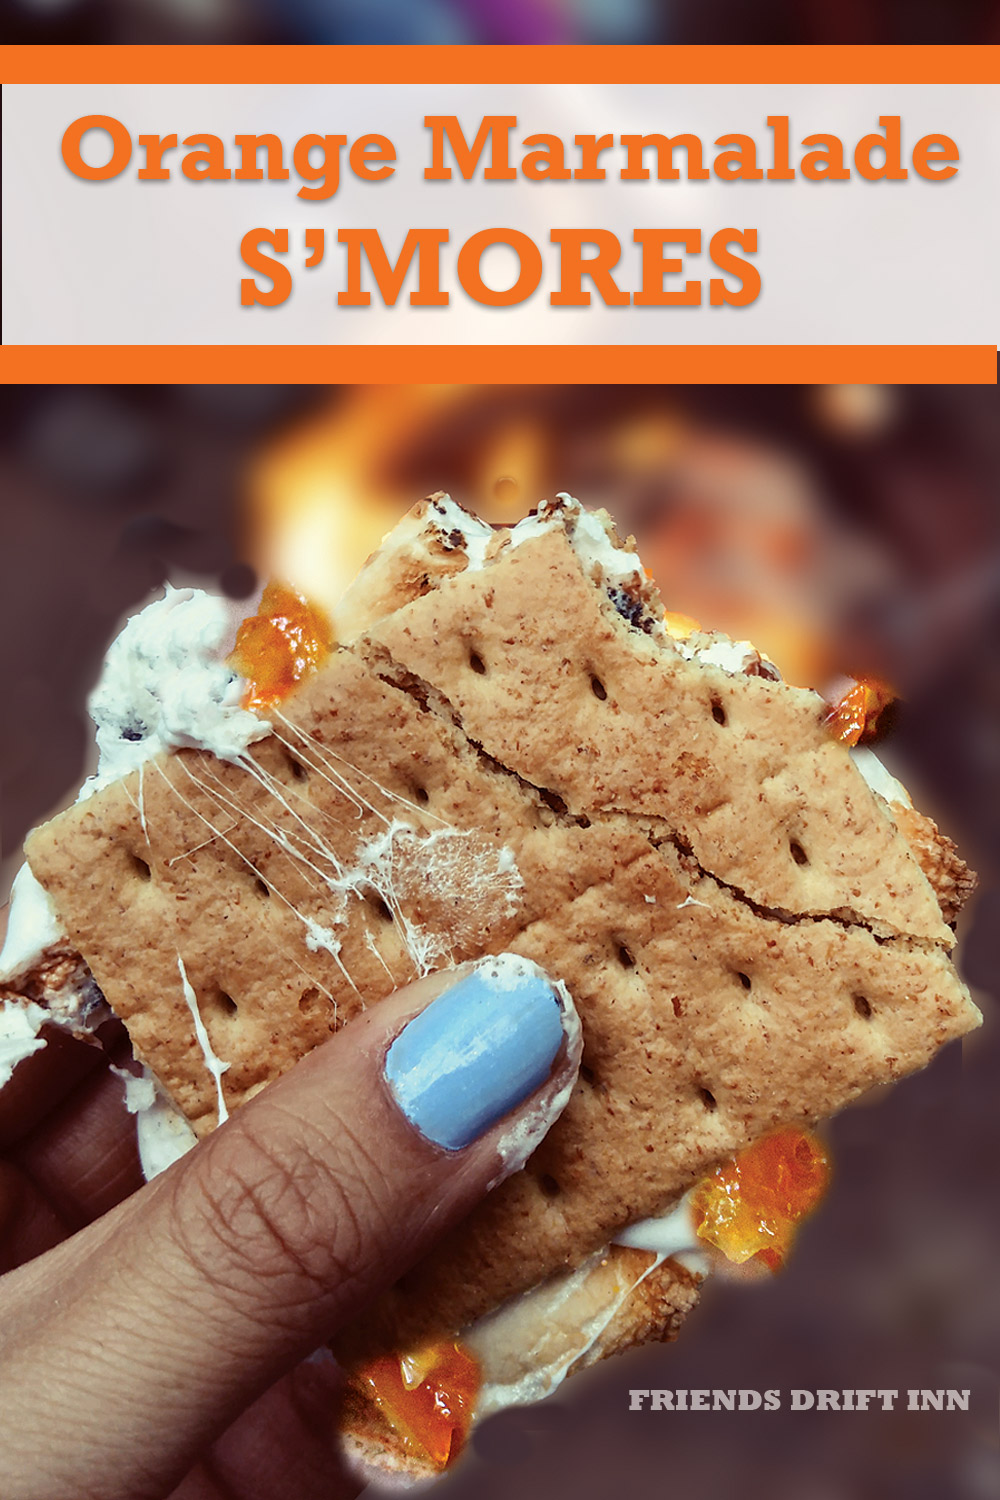 Orange Marmalade S'mores Recipe showing hand and campfire